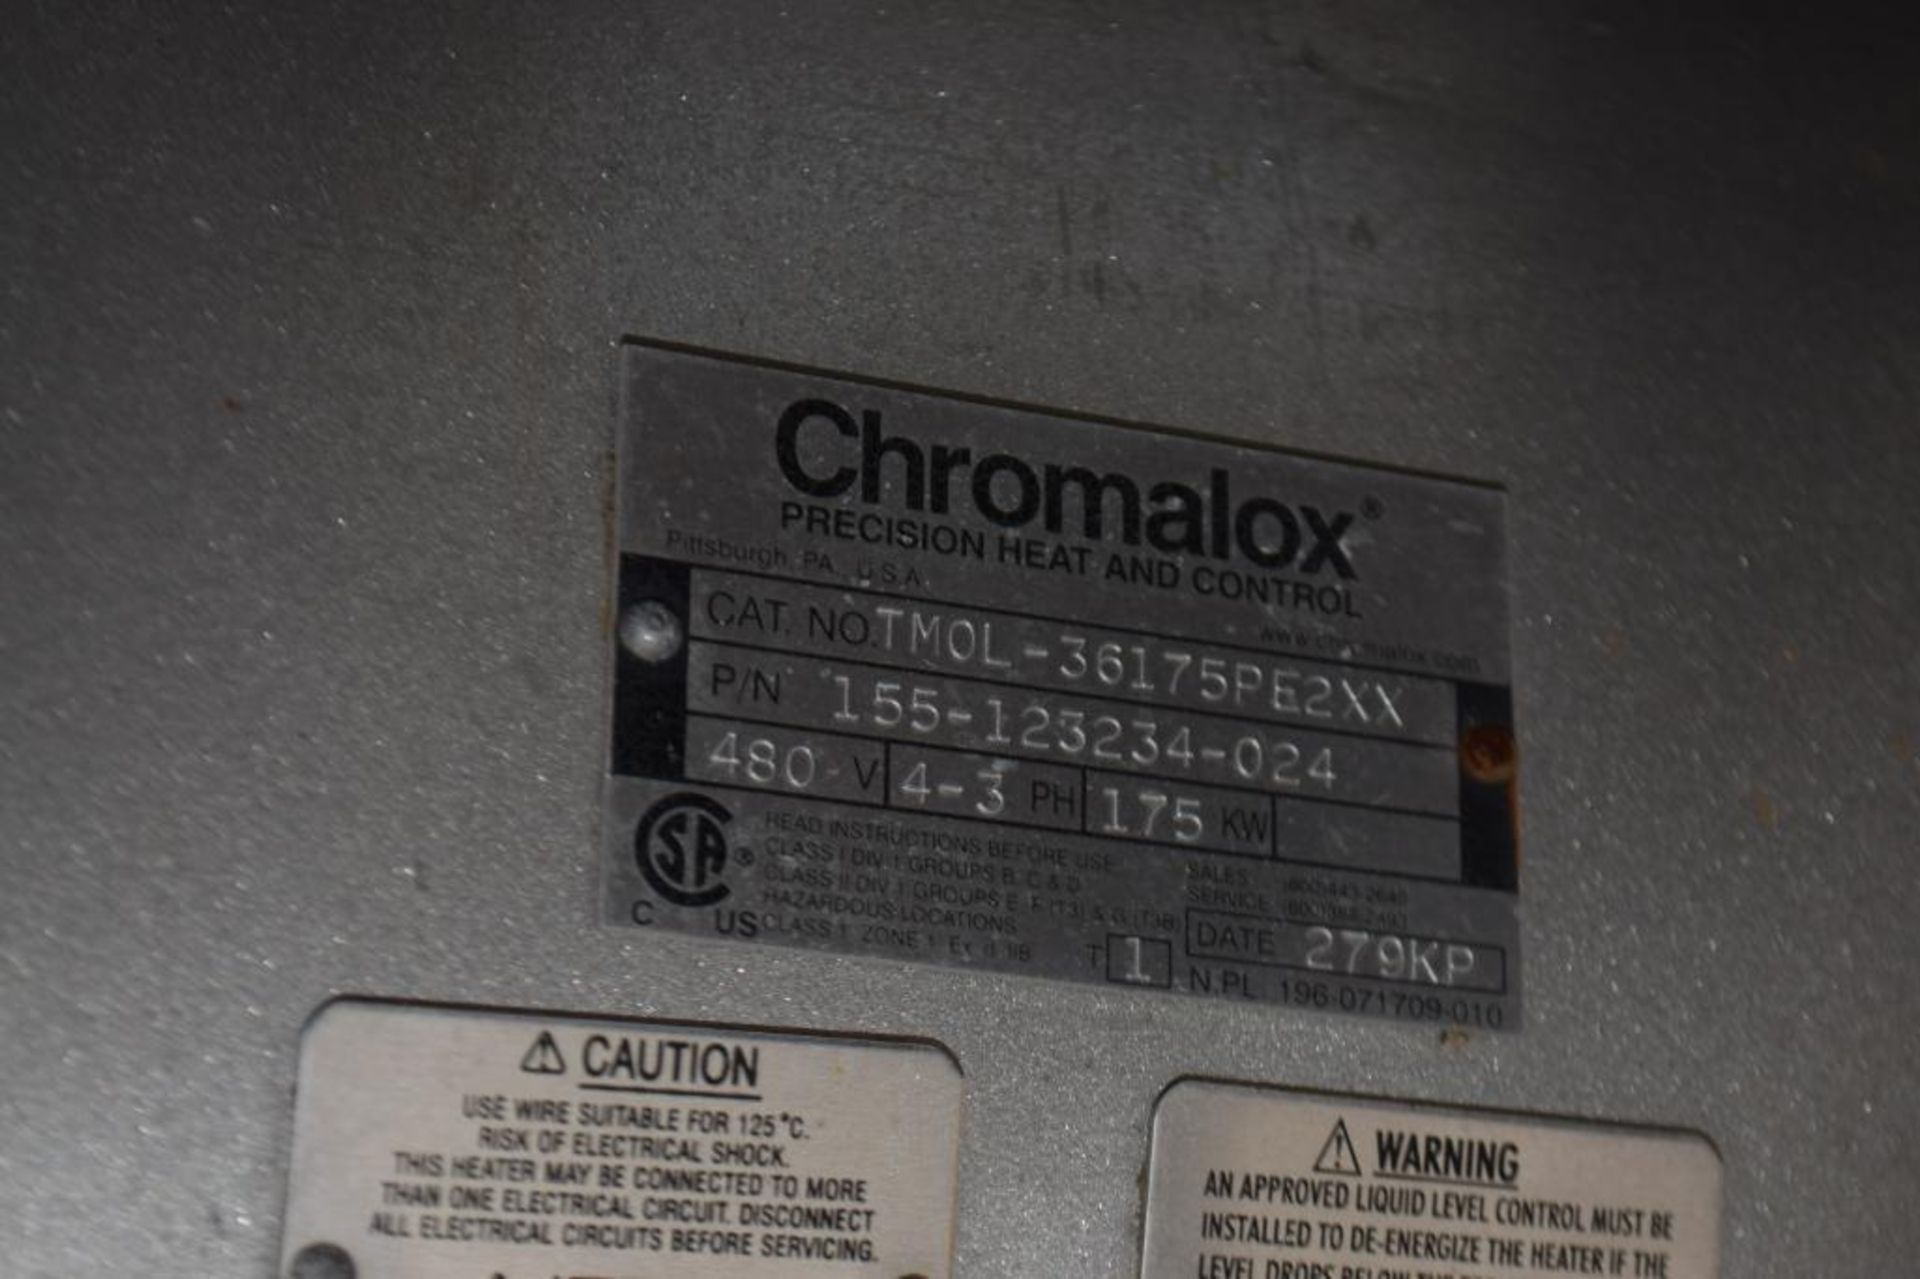 CHROMALOX Heating System Model PFCW-600B-350XX, Design Capacity 200 Gallons Per Minute, 350KW - Image 6 of 8